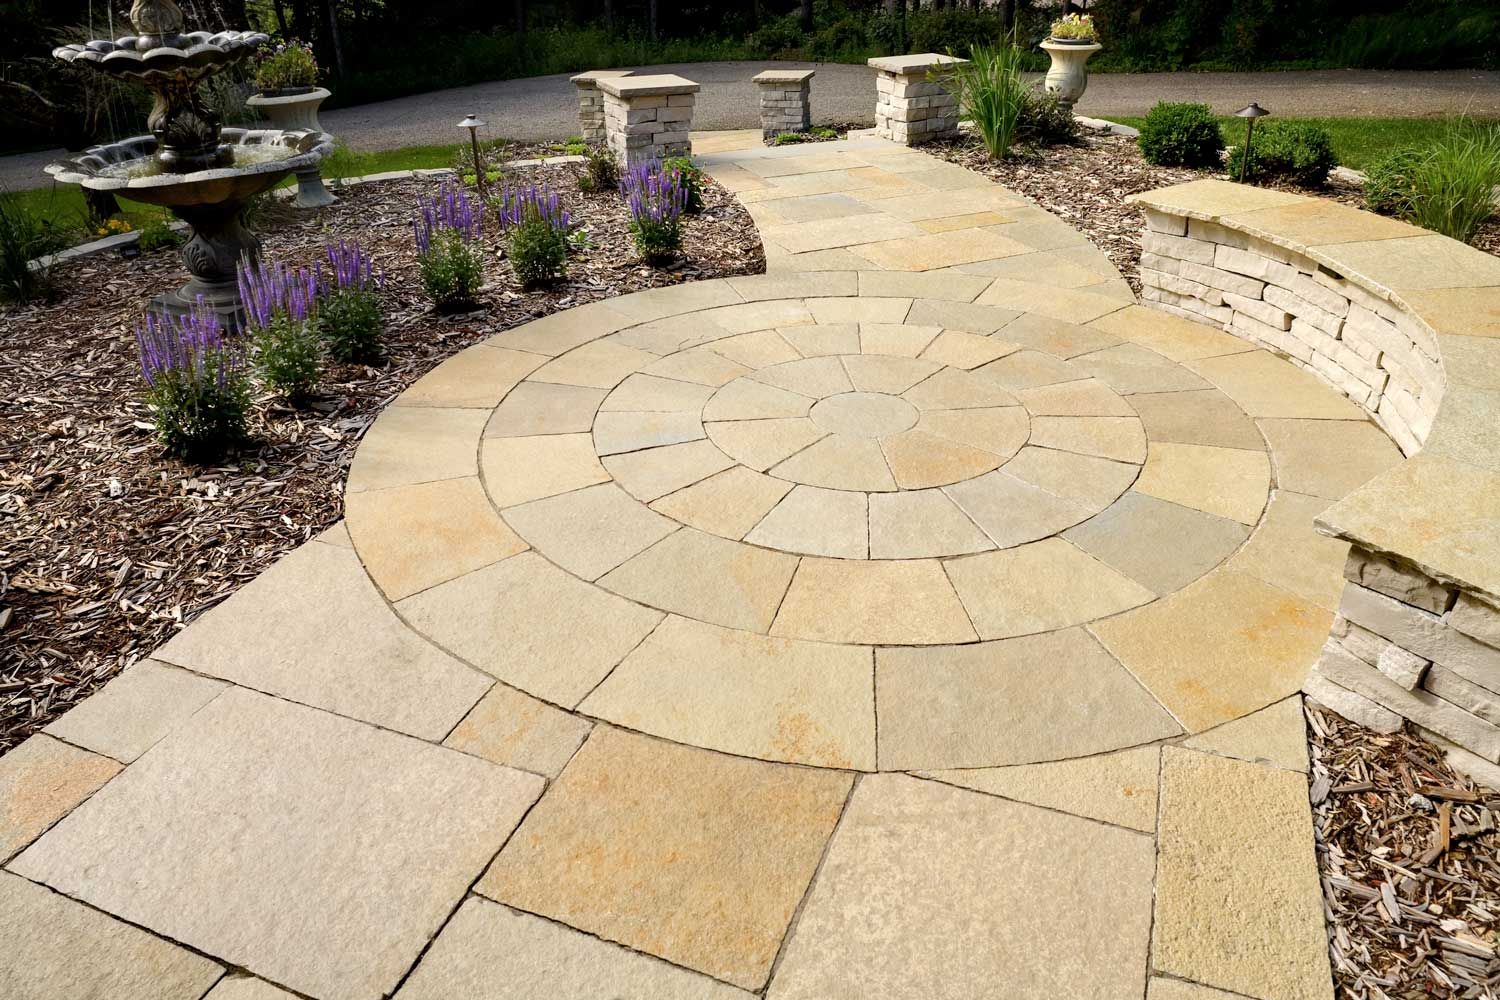 Natural Flagstone pavers create a walkway that leads to the street and patio with seat wall